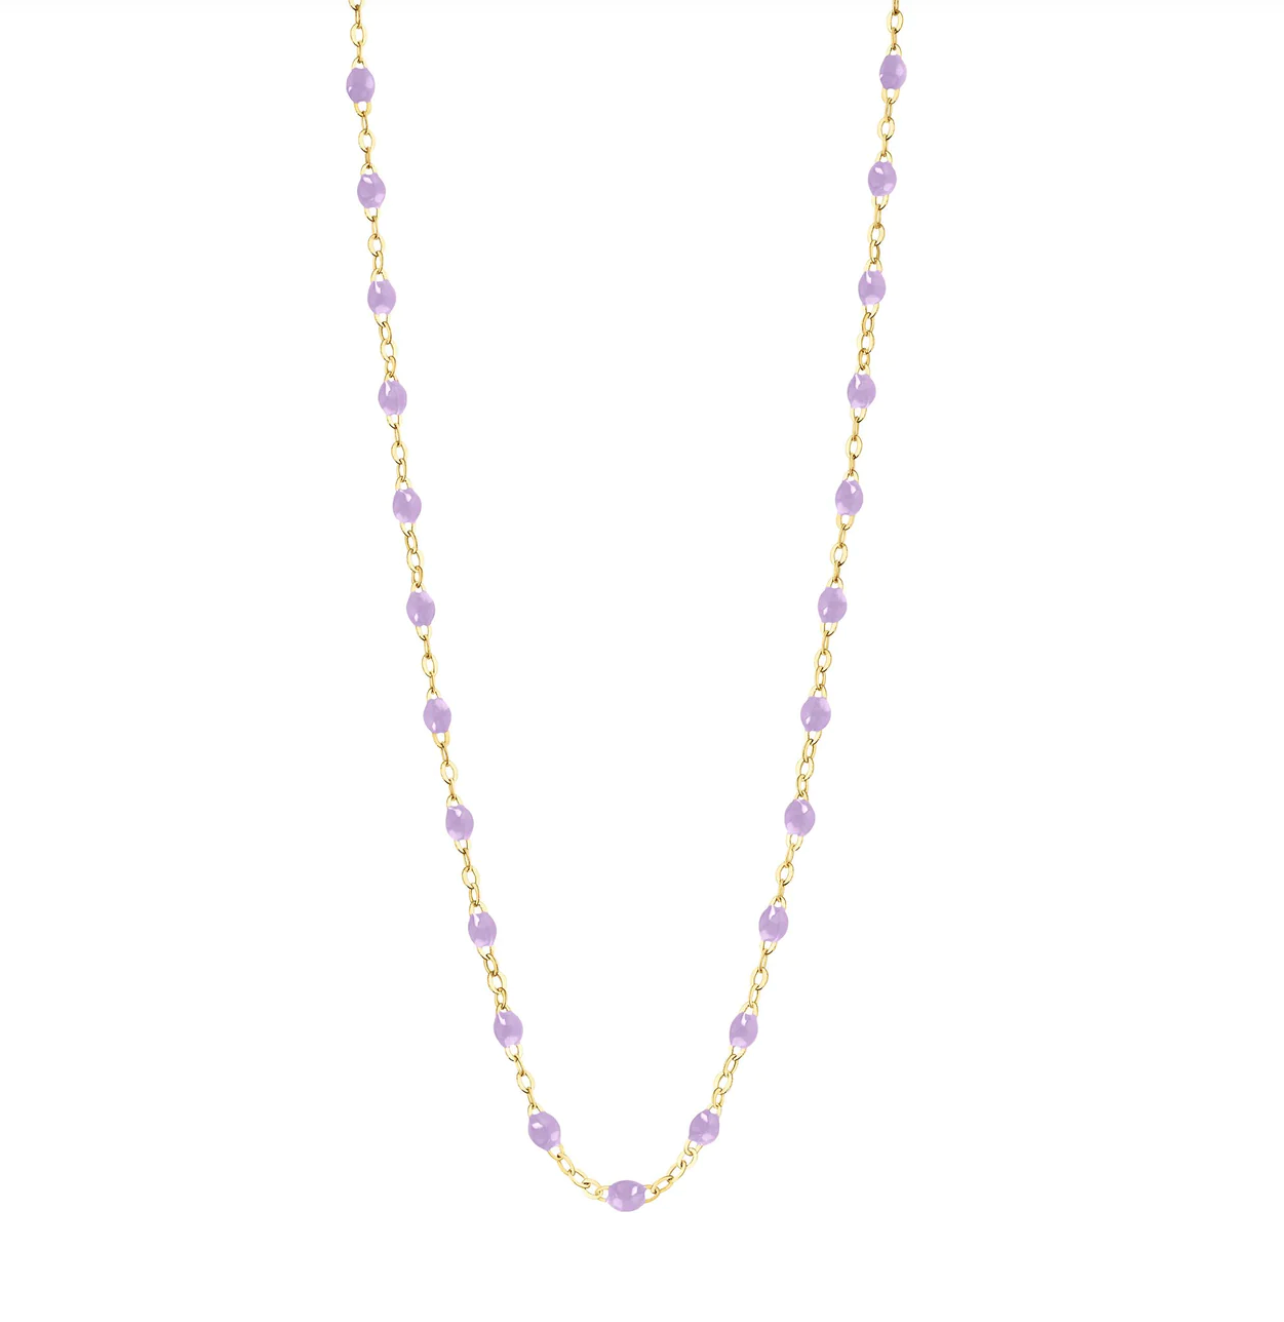 Giselle Necklace - Lilac